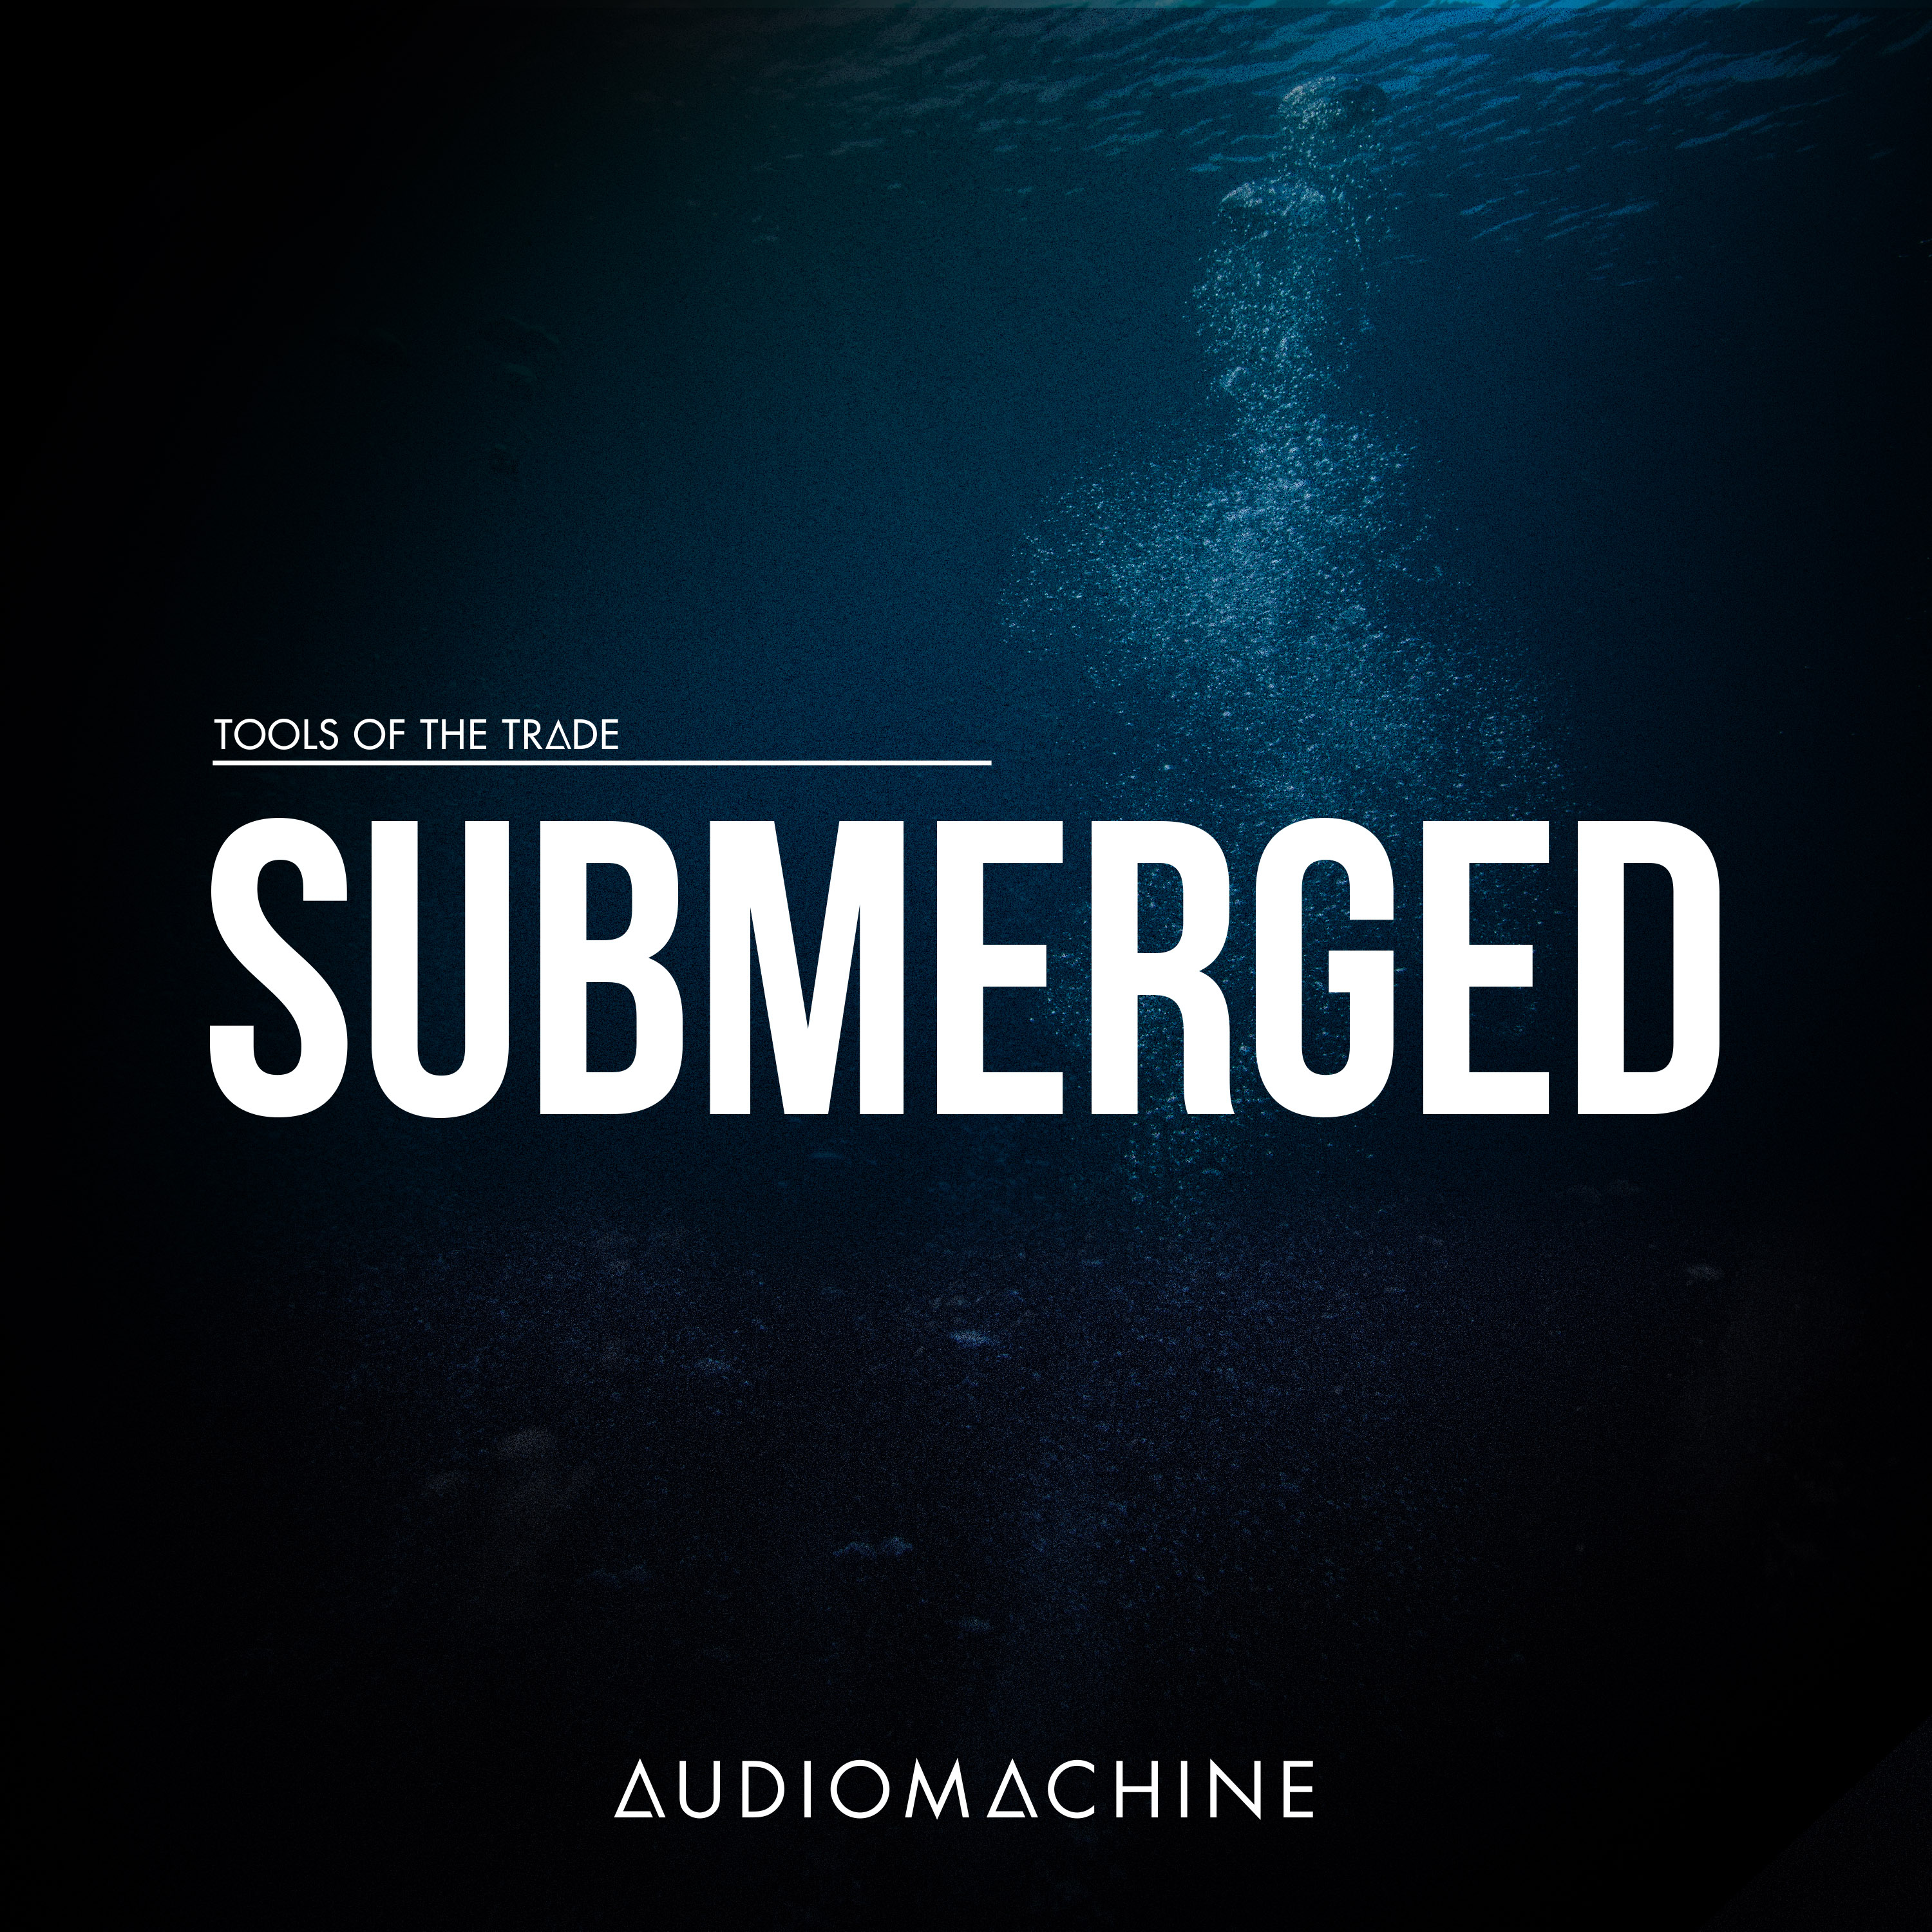 Tools of the Trade: Submerged